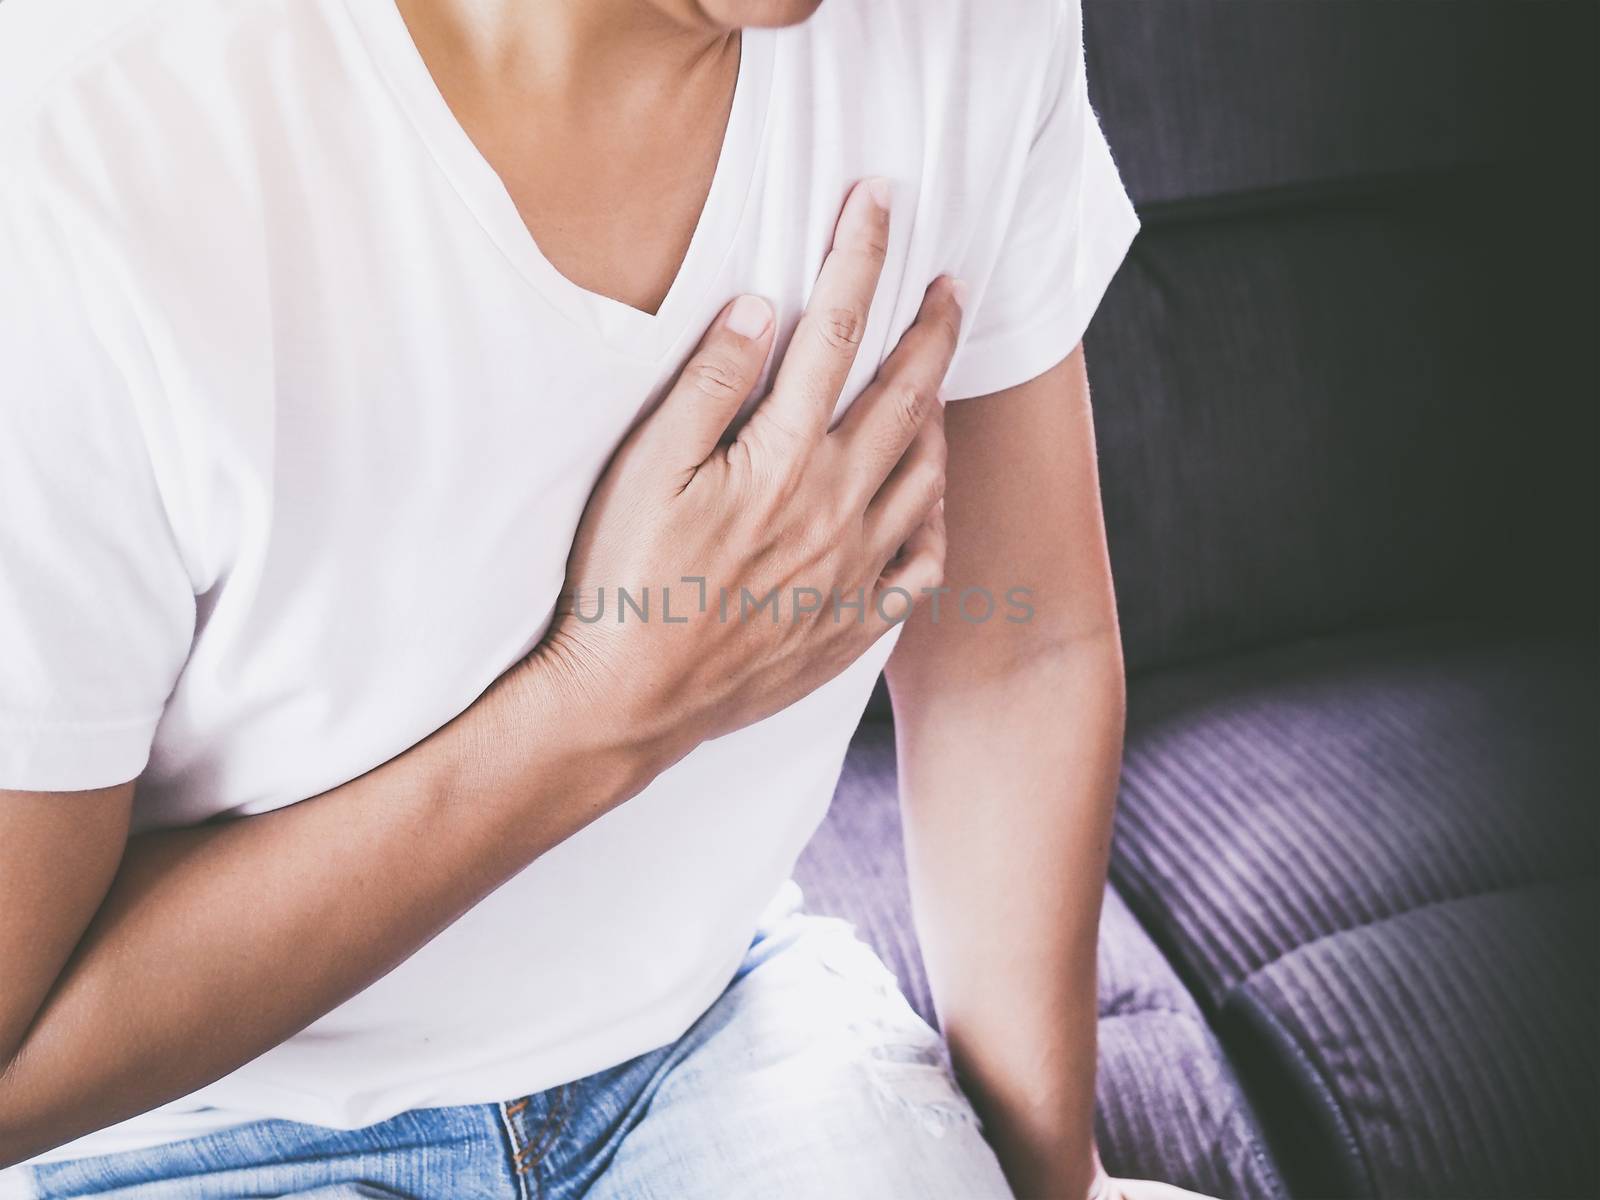 Symptoms of chest pain due to myocardial infarction Sick with heart disease